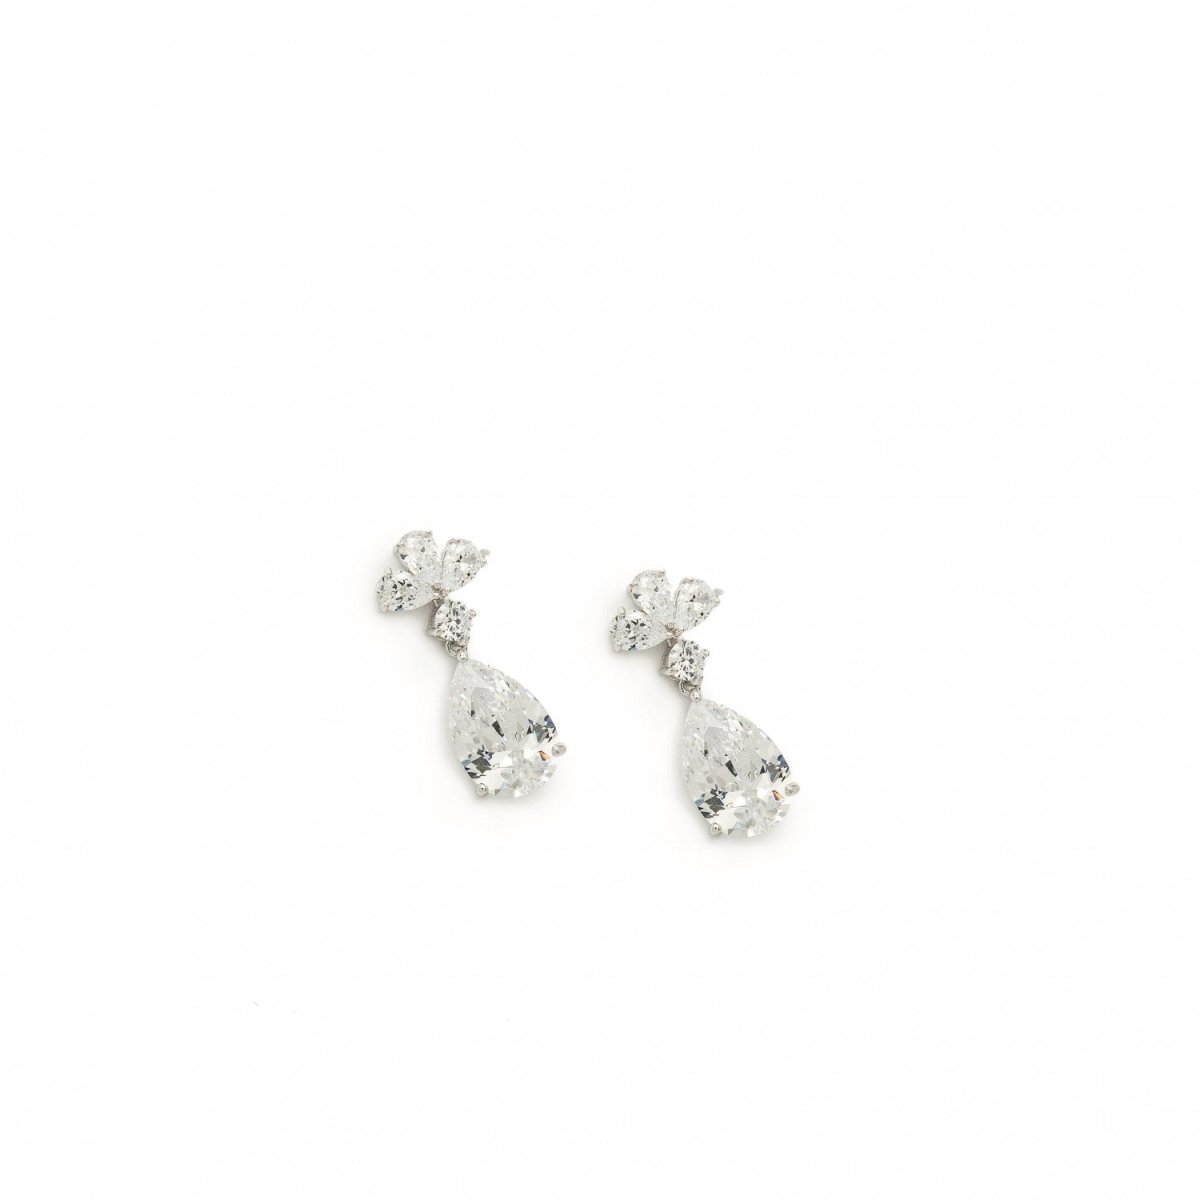 Small teardrop and zirconia bridal earrings - LINEARGENT